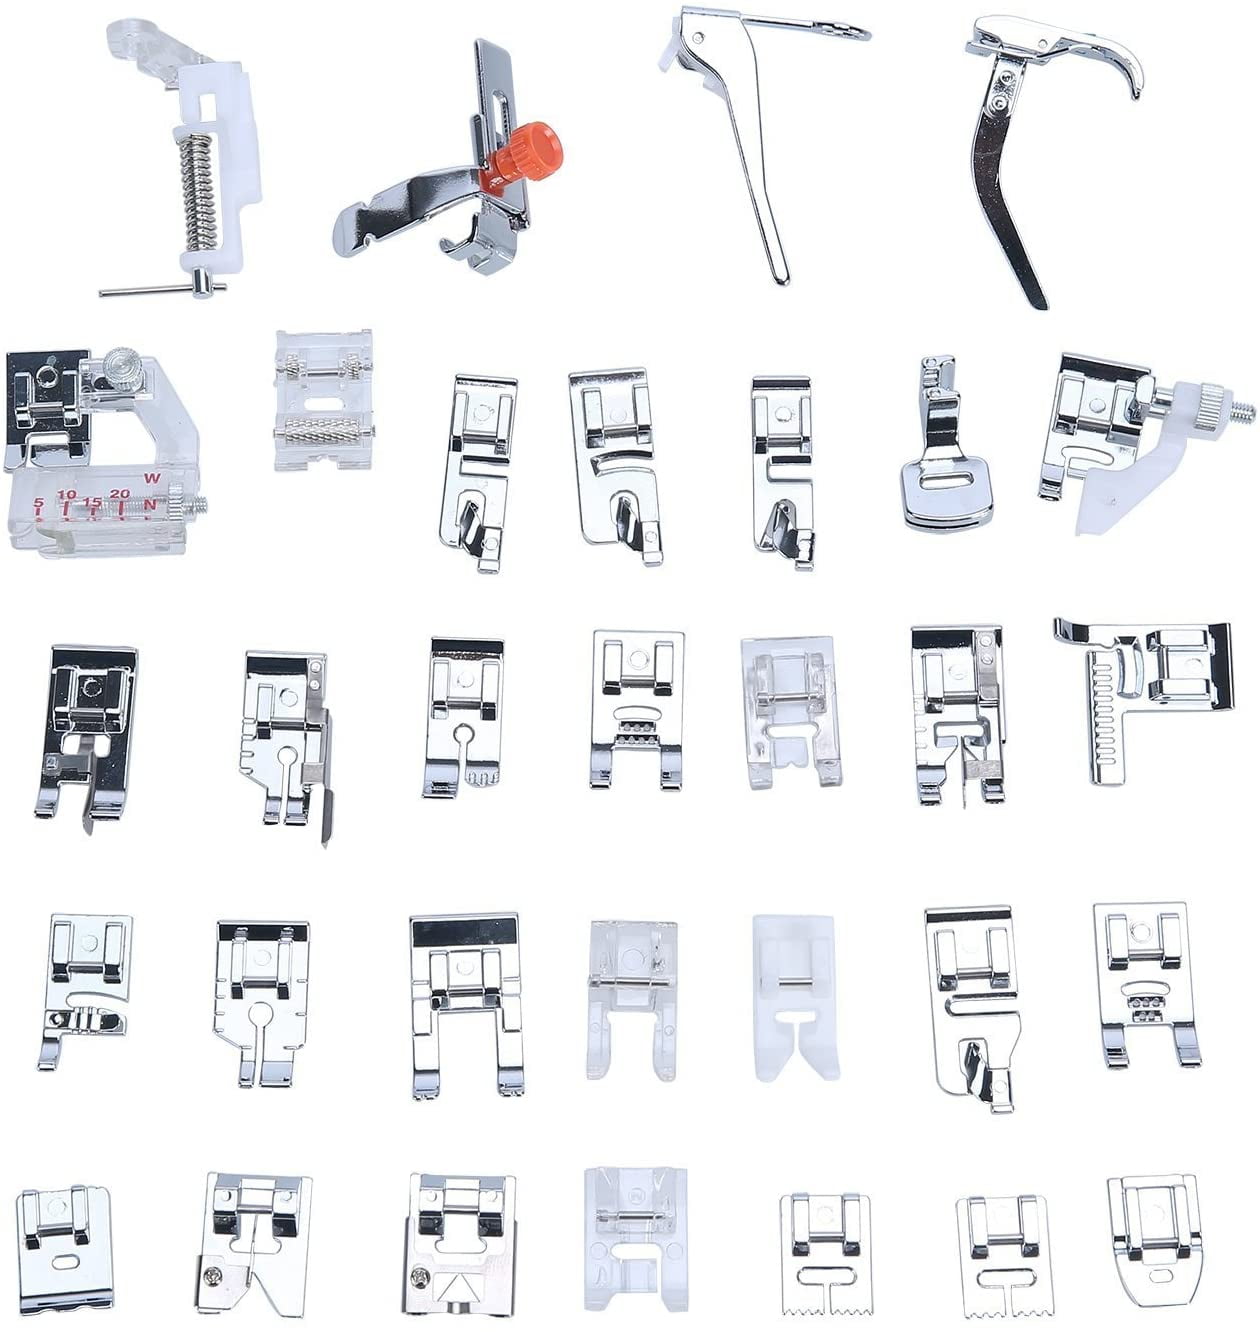 Singer Kenmore Simplicity Janome DomesticSewing Machine Presser Foot Set for Brother,Babylock Toy,New Home and White Low Shank Sewing Machine 32pcs